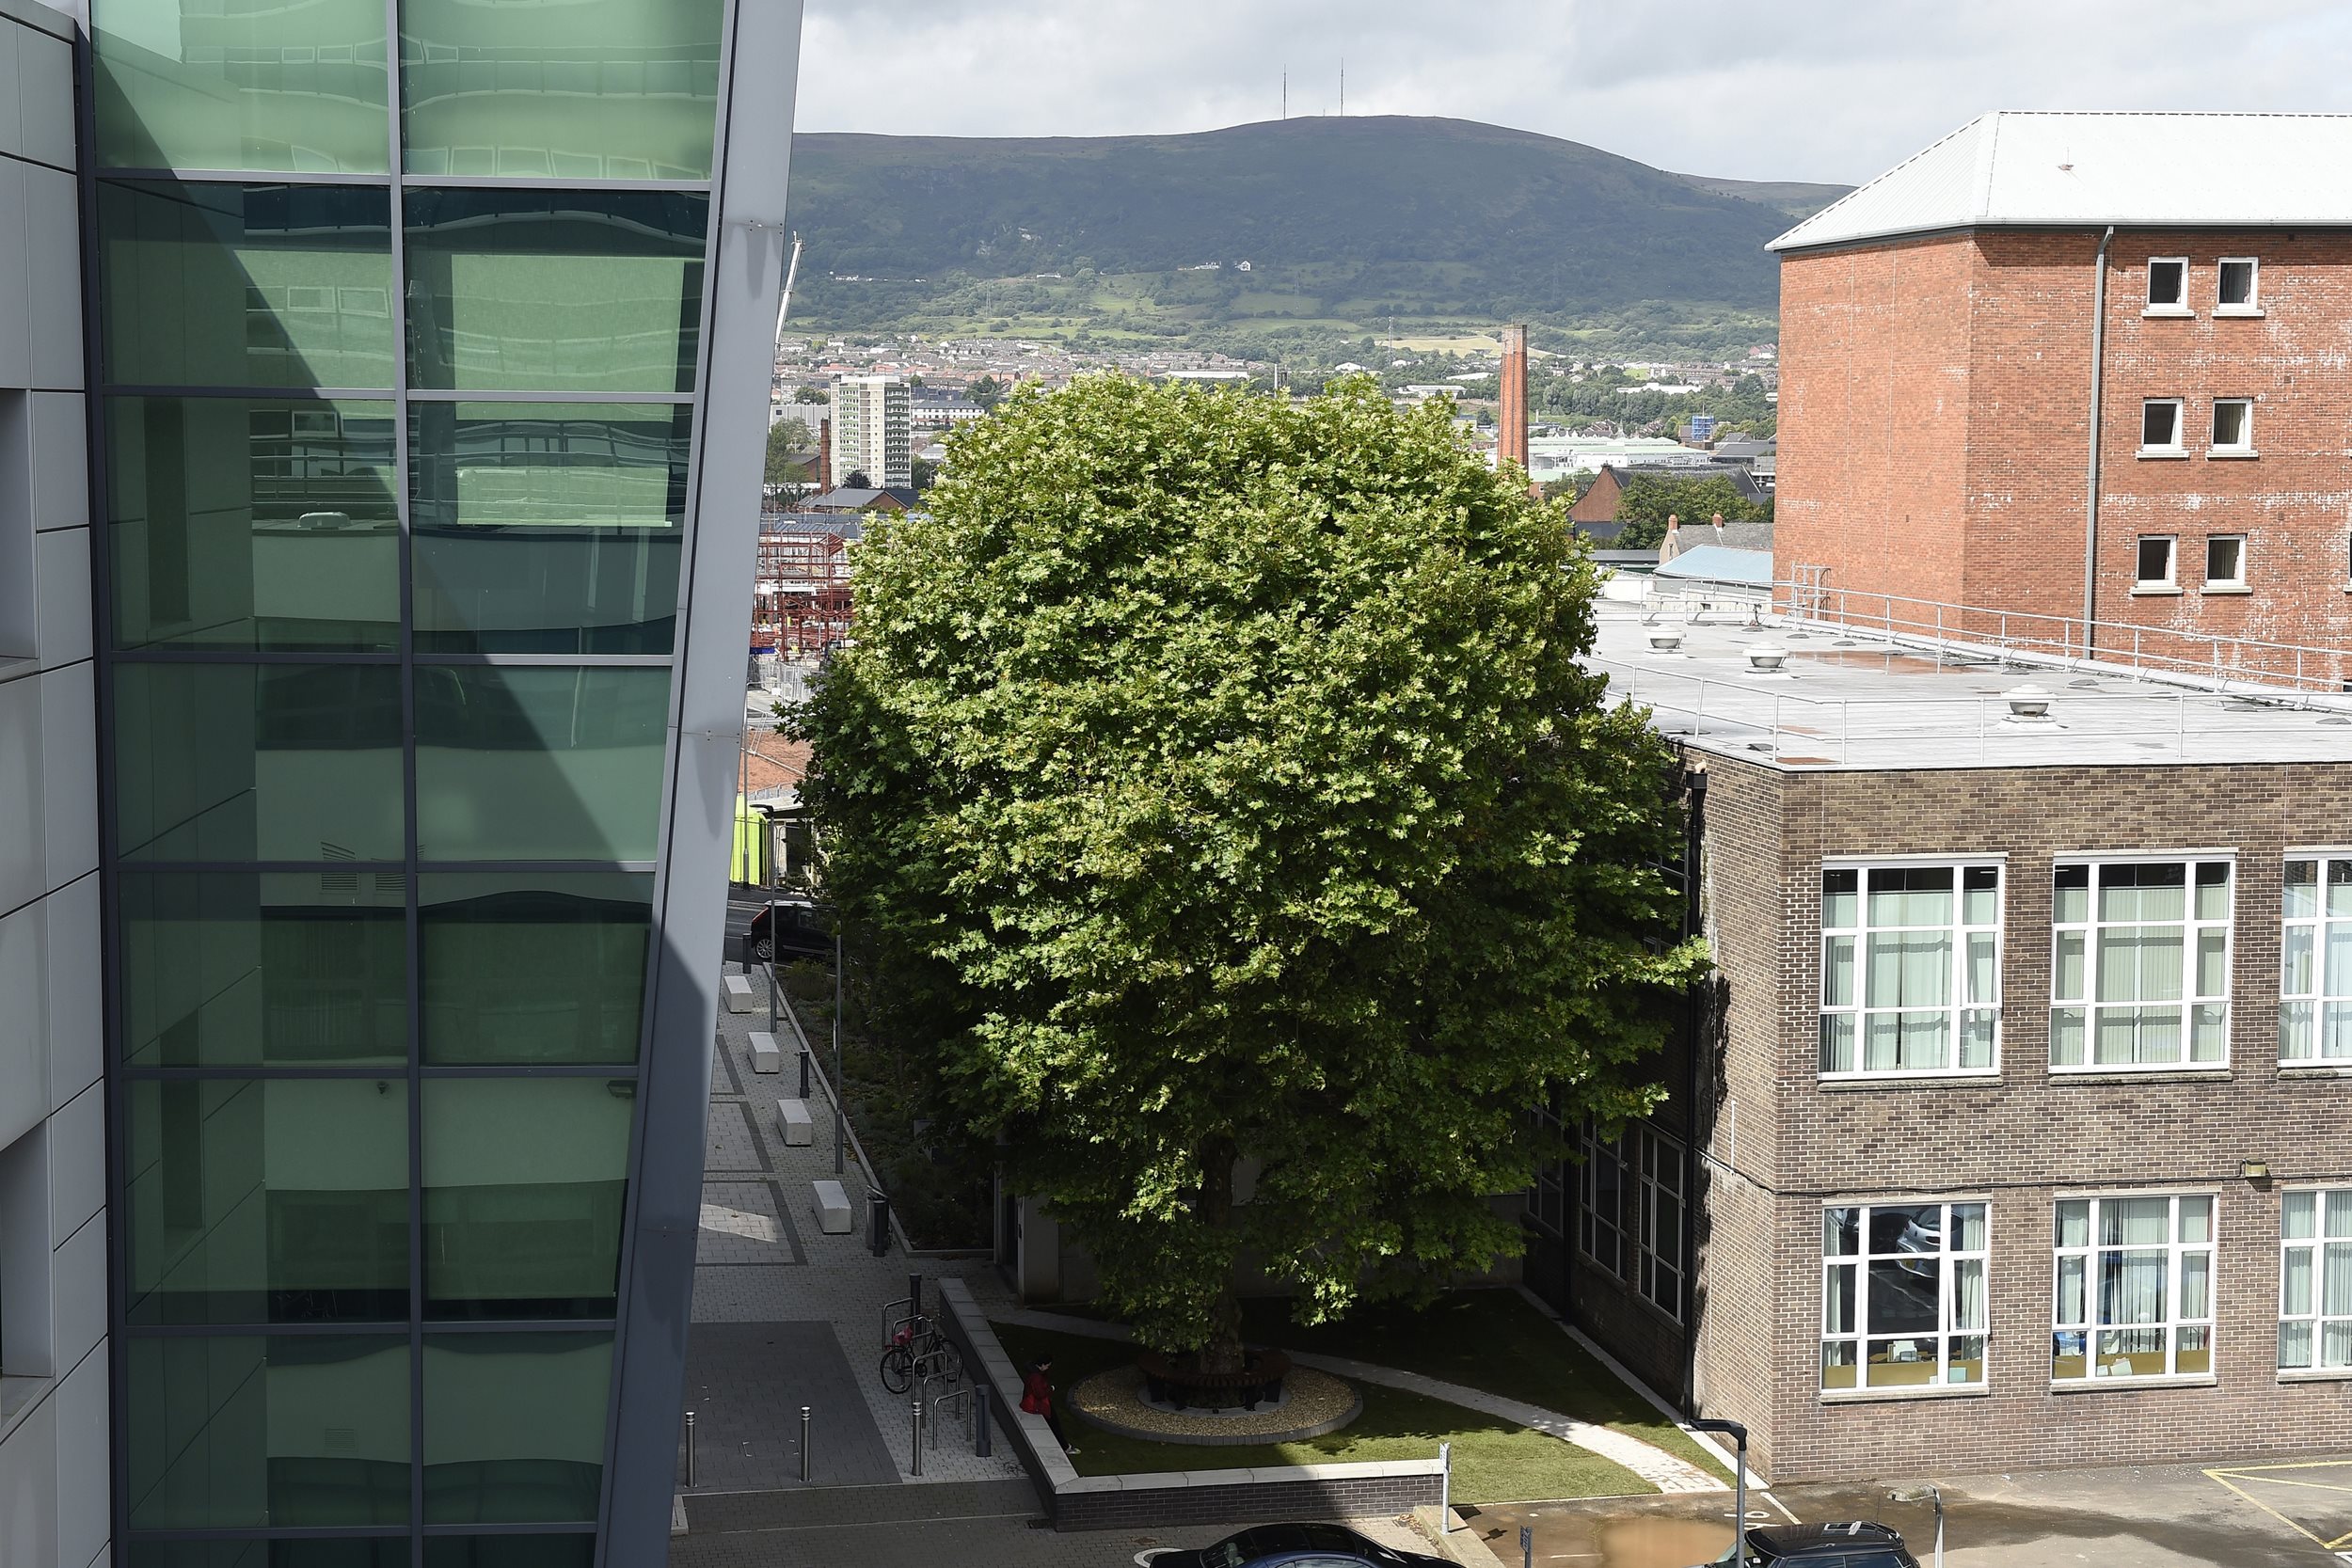 The Erskine House Tree, between Belfast City Hospital and Queen’s University Belfast, was crowned Tree of the Year 2017.